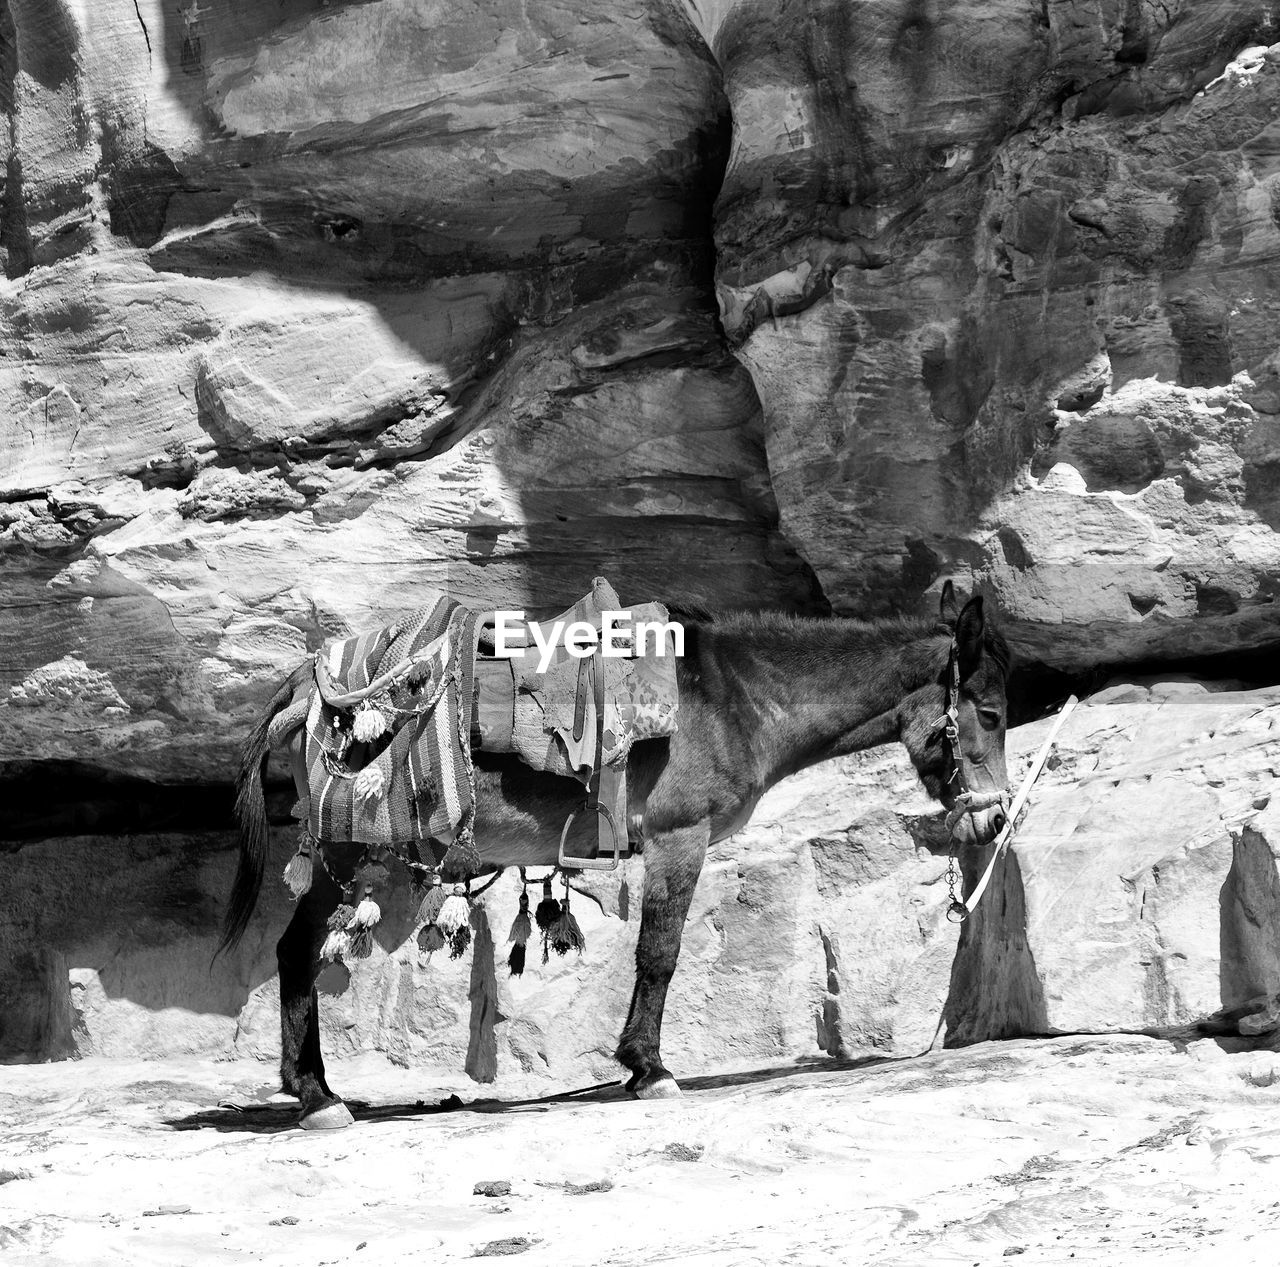 VIEW OF HORSE STANDING ON ROCKS